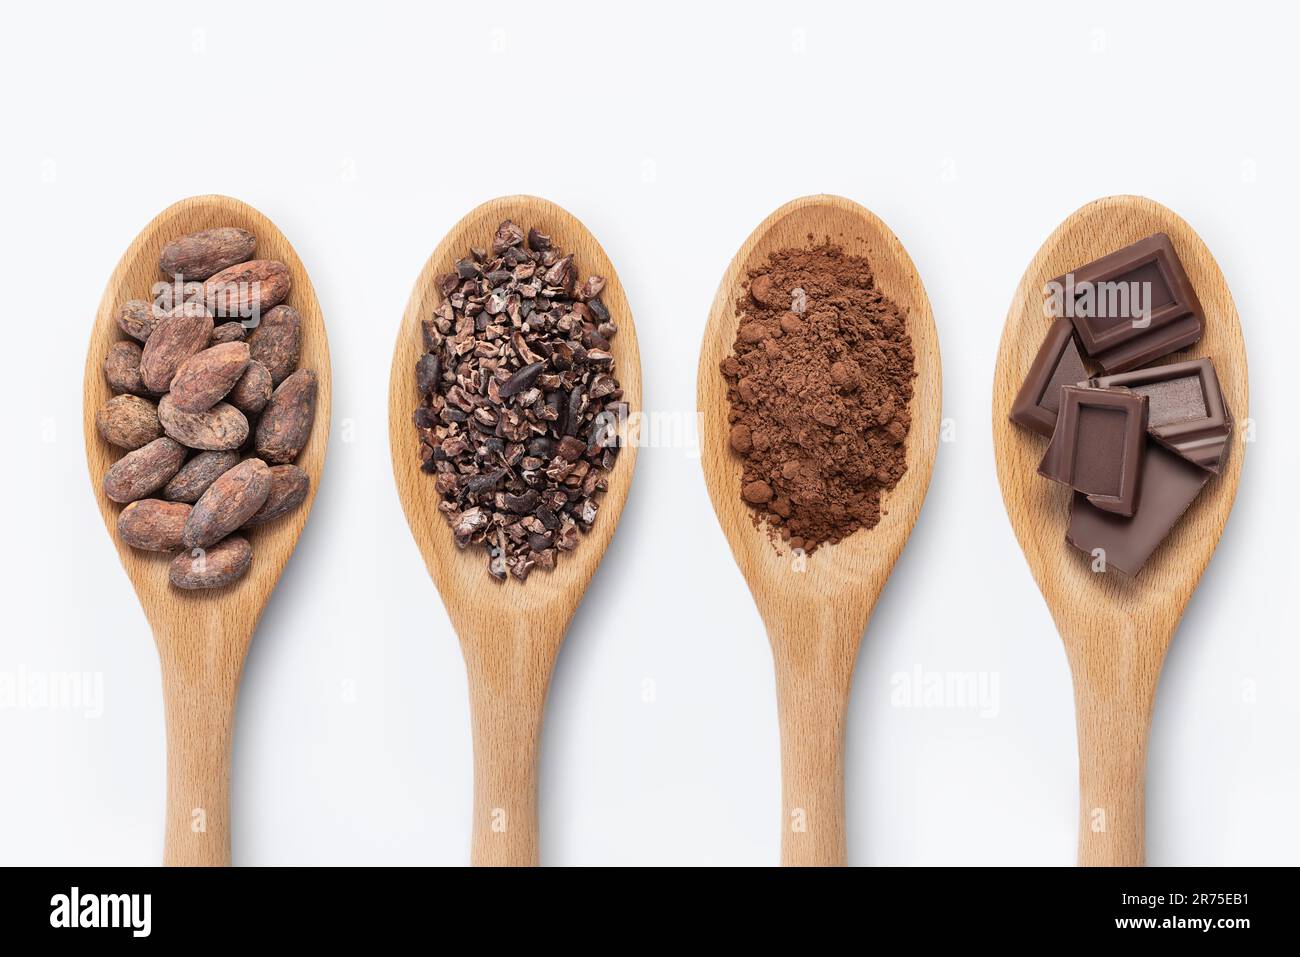 Chocolate bar, cocoa powder, cacao beans and nibs, heap in wooden spoons, chocolate background Stock Photo